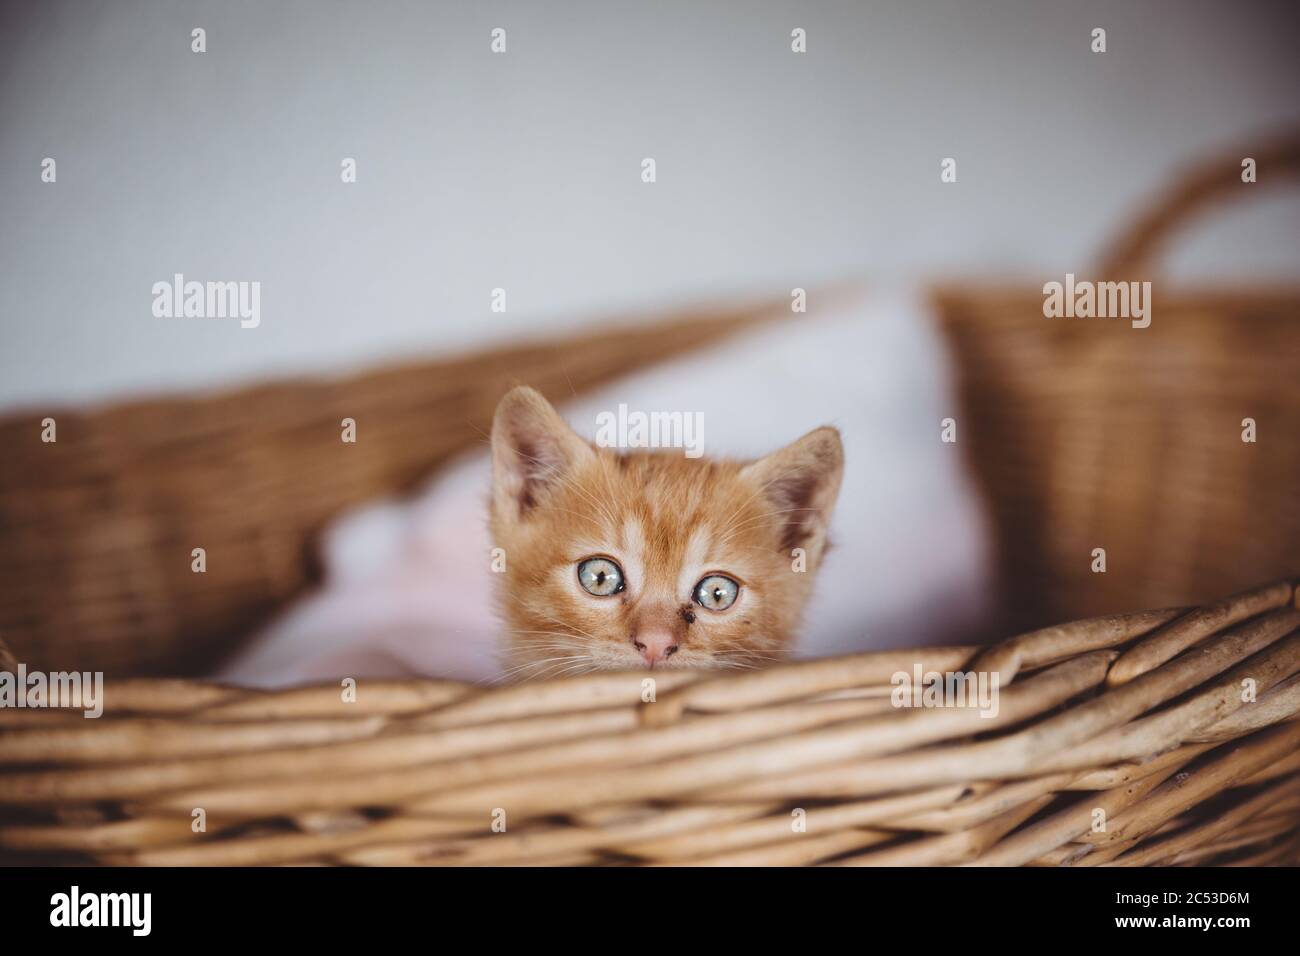 Hidden cute brown curious kitten with blue eyes looking over the edge of the creel Stock Photo